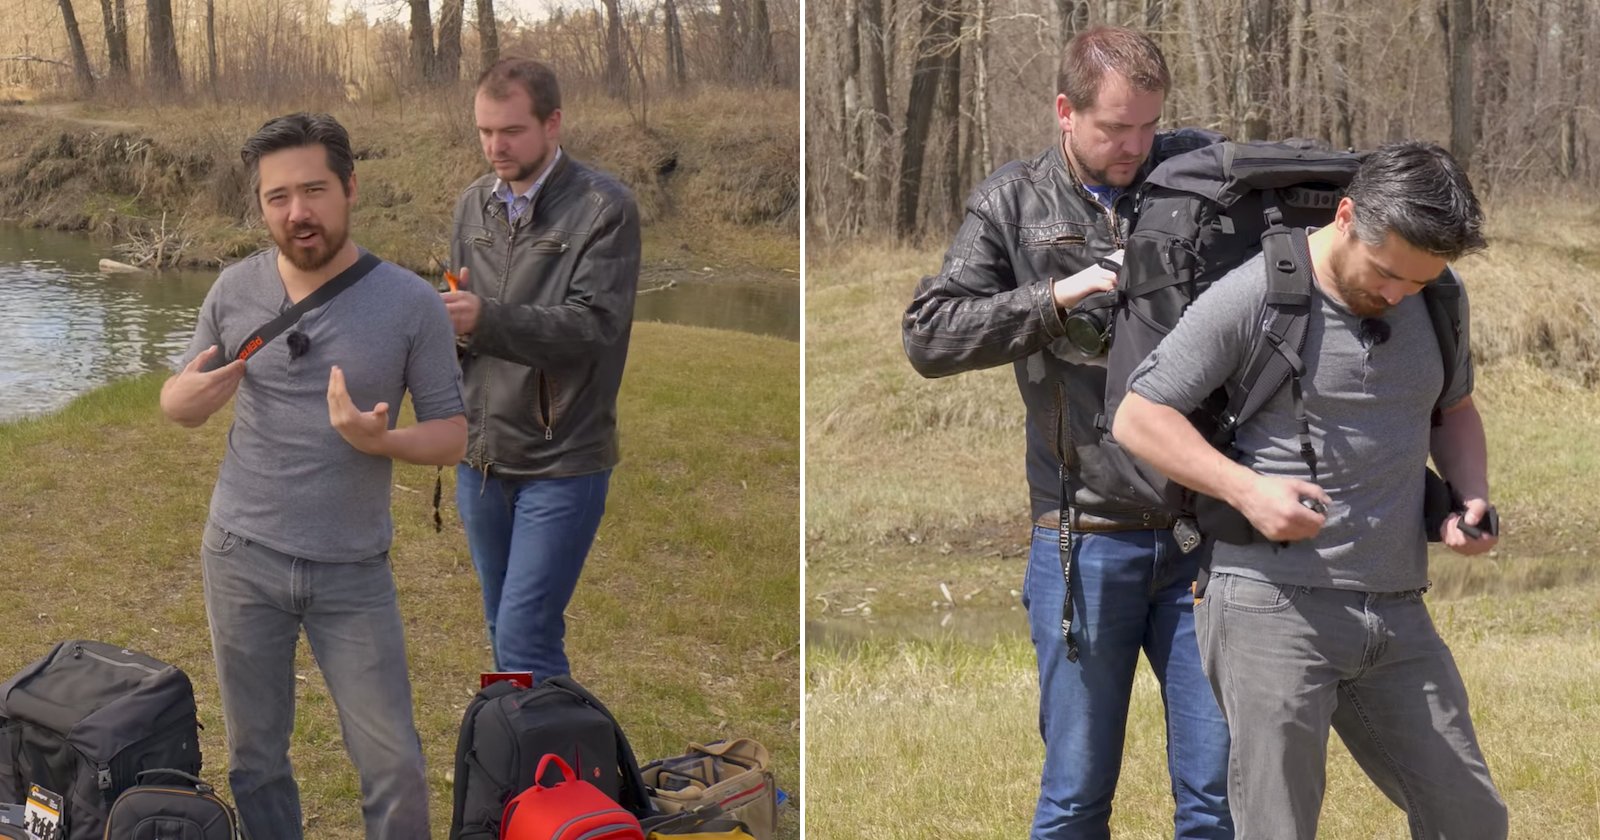 The Best and Worst Ways to Carry Your Camera Gear: Straps, Slings, and More